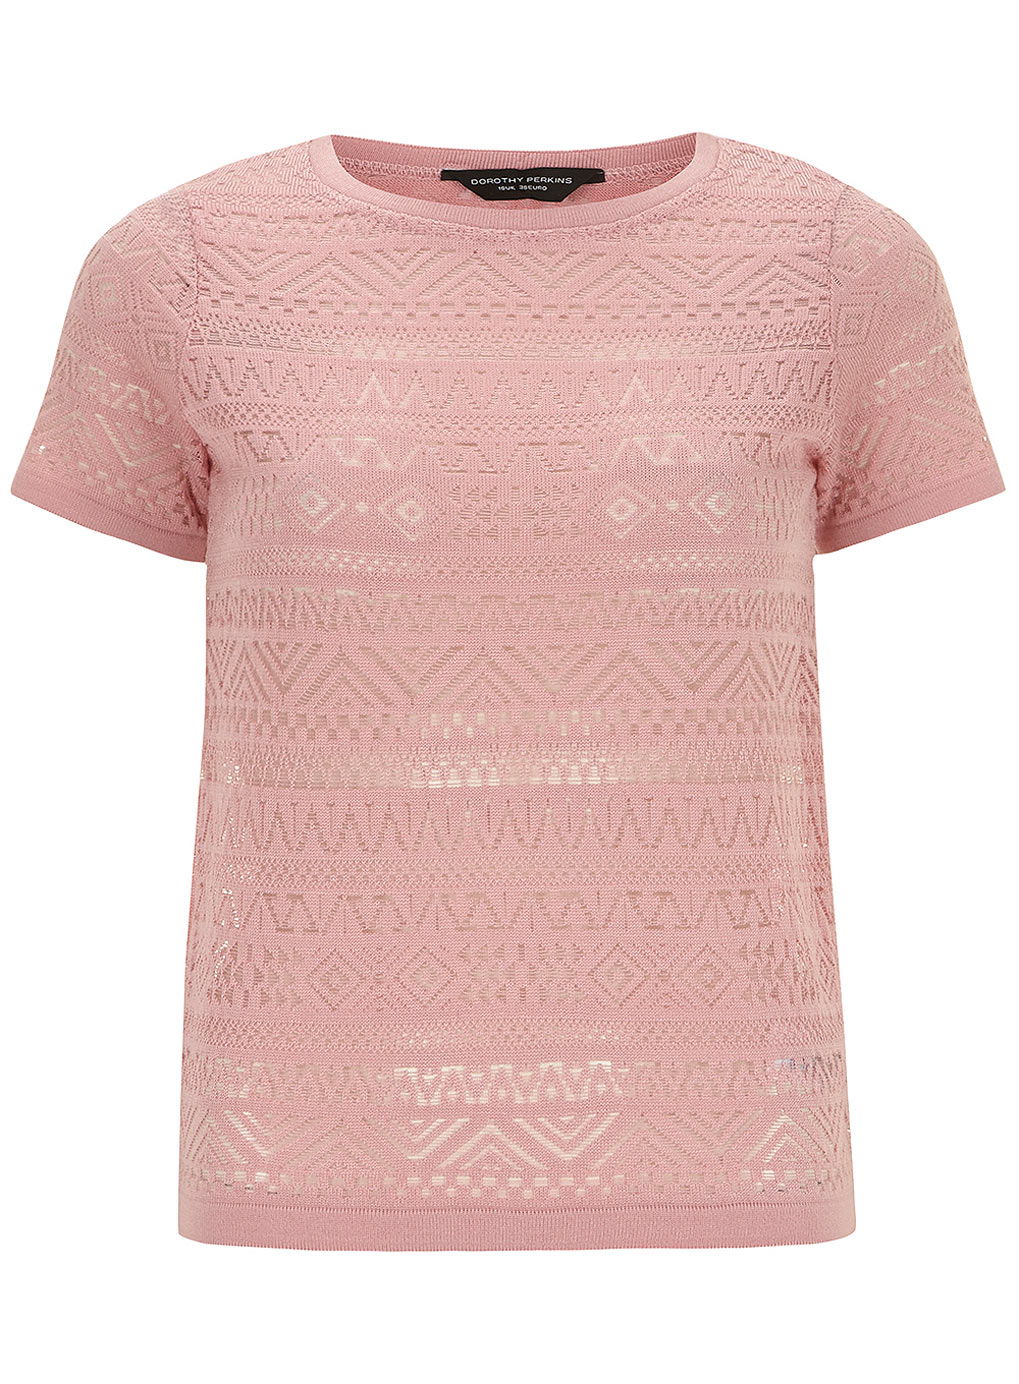 Pink lace knitted t-shirt 55148614